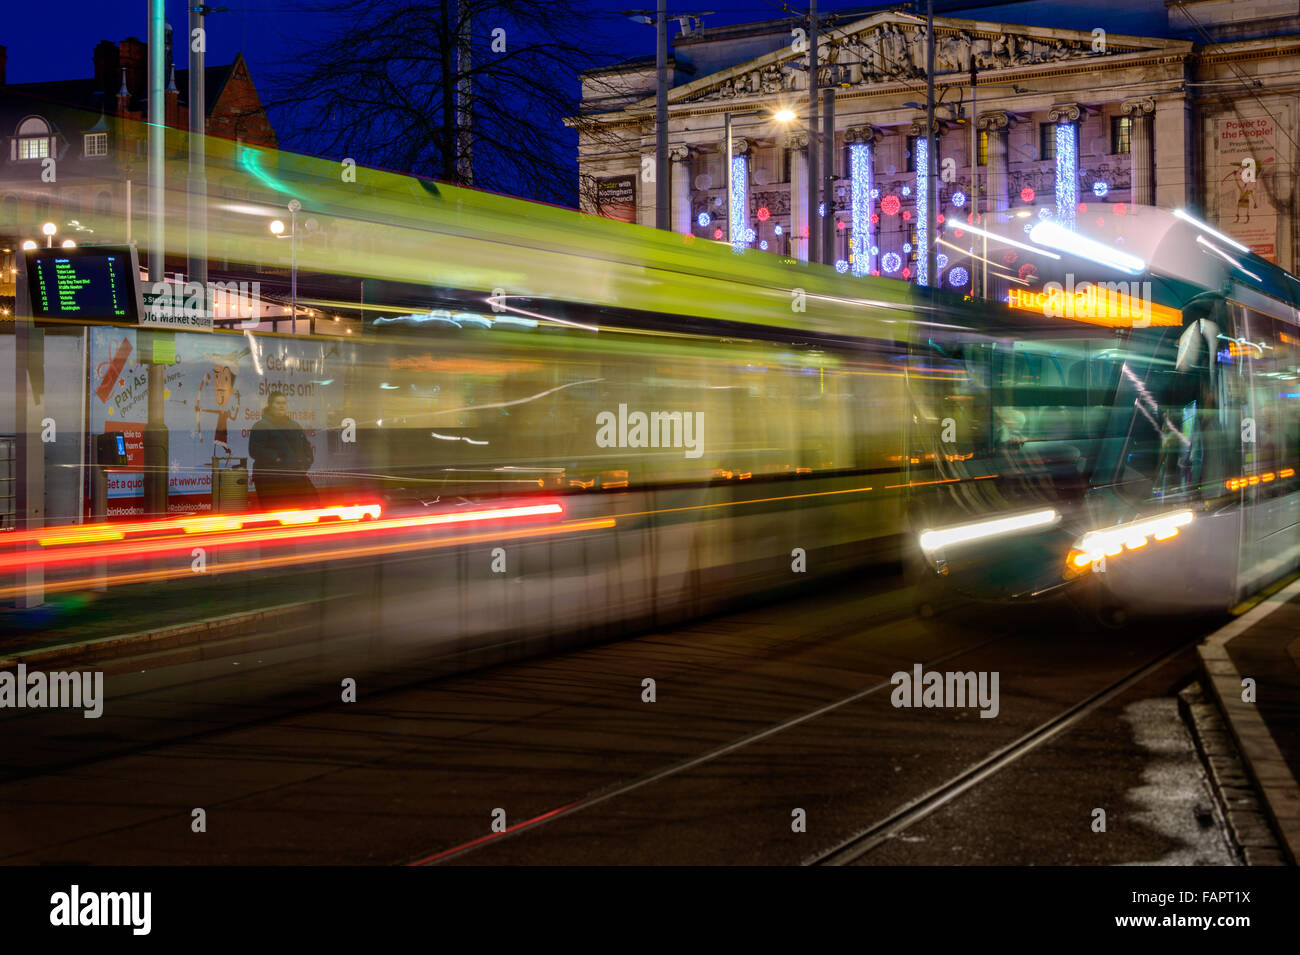 Two Nottingham trams, blurred in motion, pass each other in the market square at Christmas In Nottingham. Stock Photo